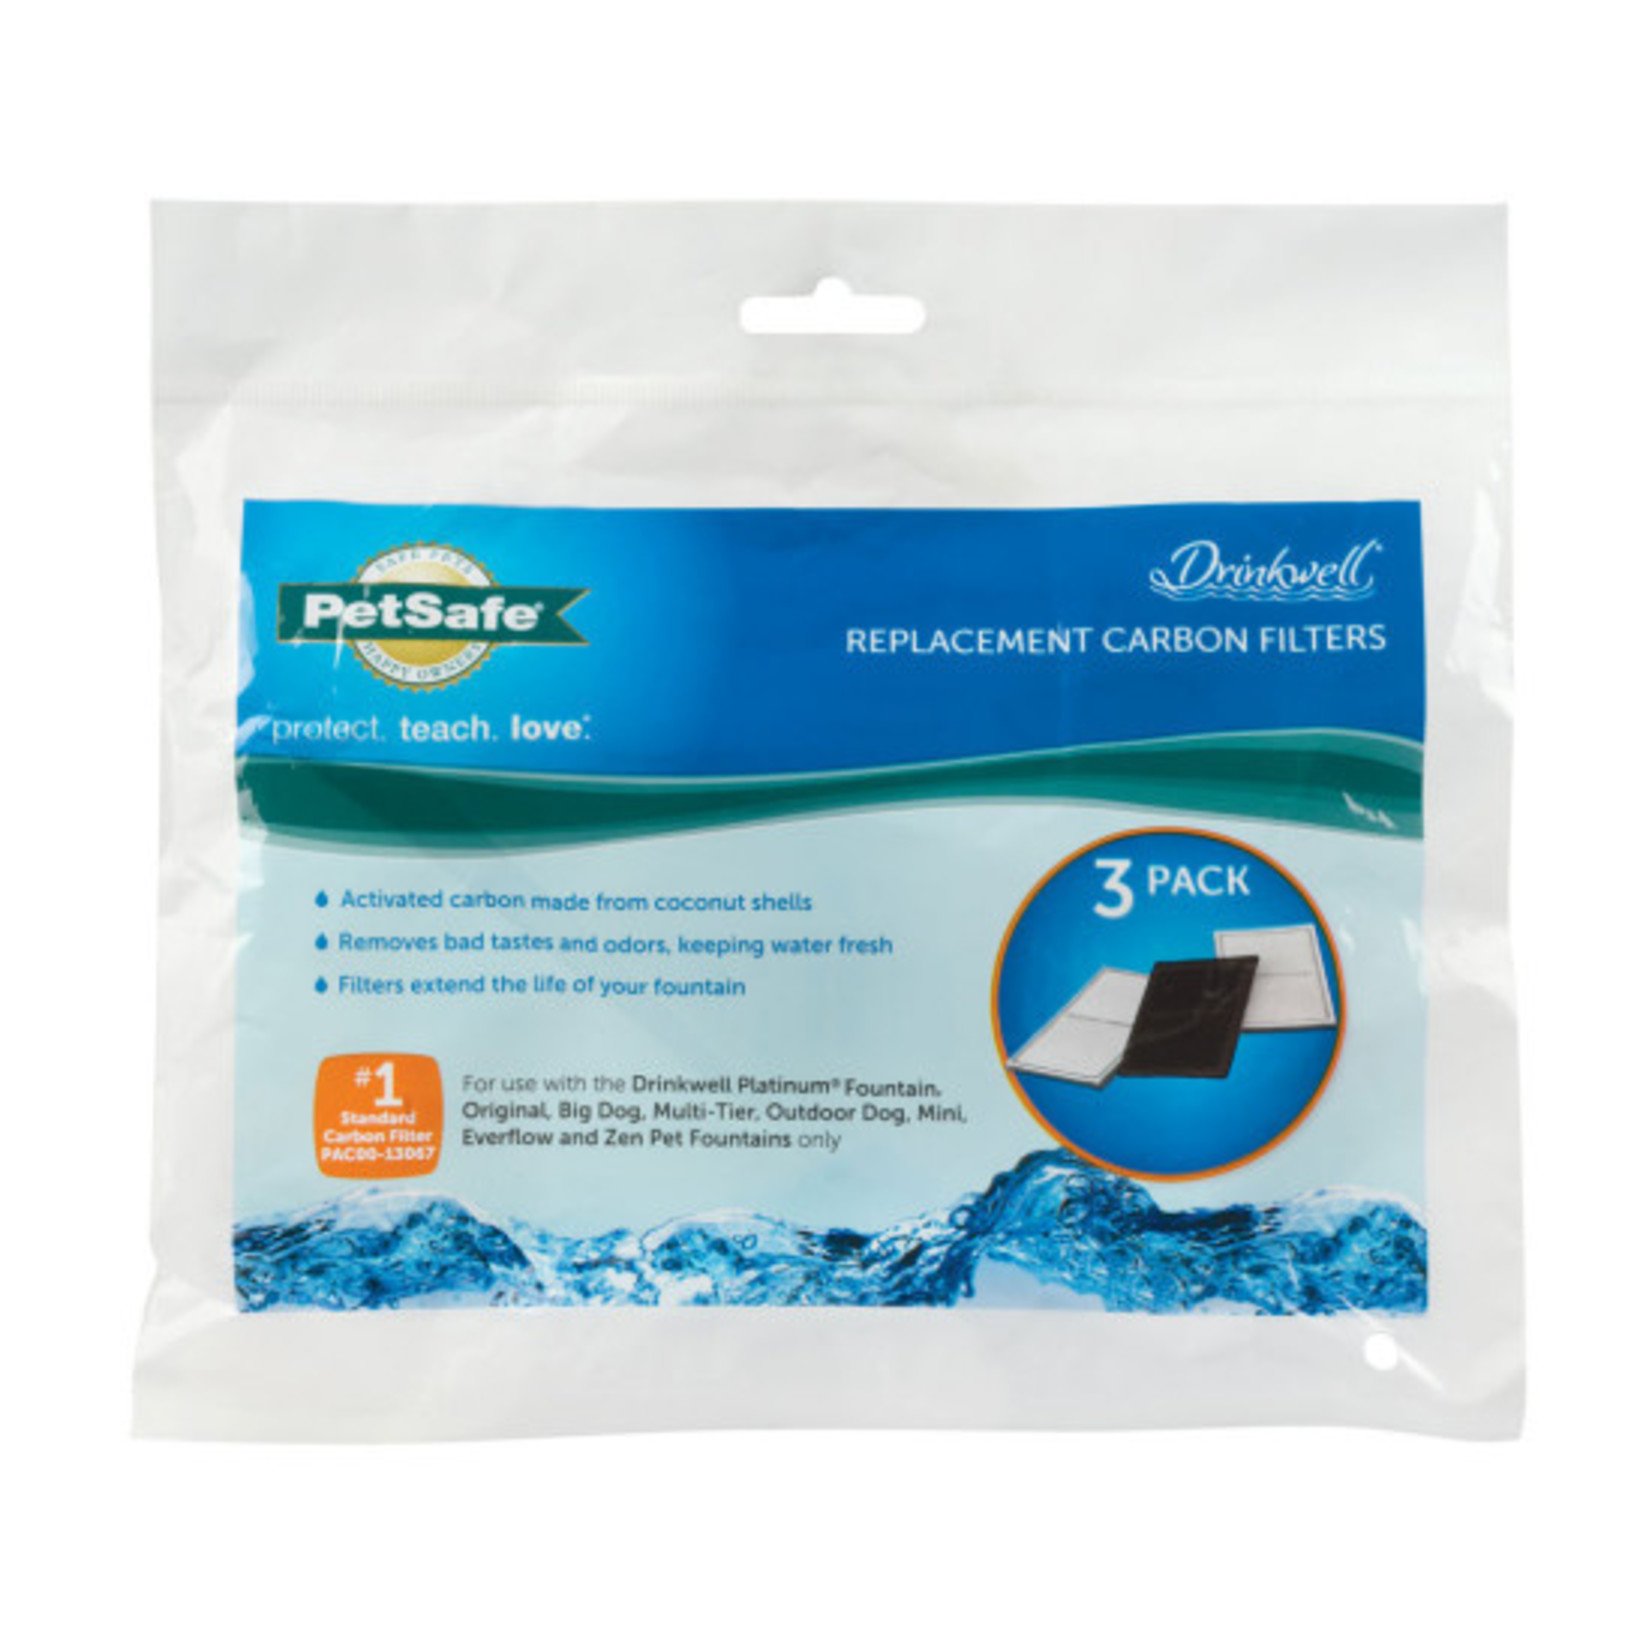 PetSafe Drinkwell Pet Water Fountain #1 Standard Replacement Carbon Filters 3pk